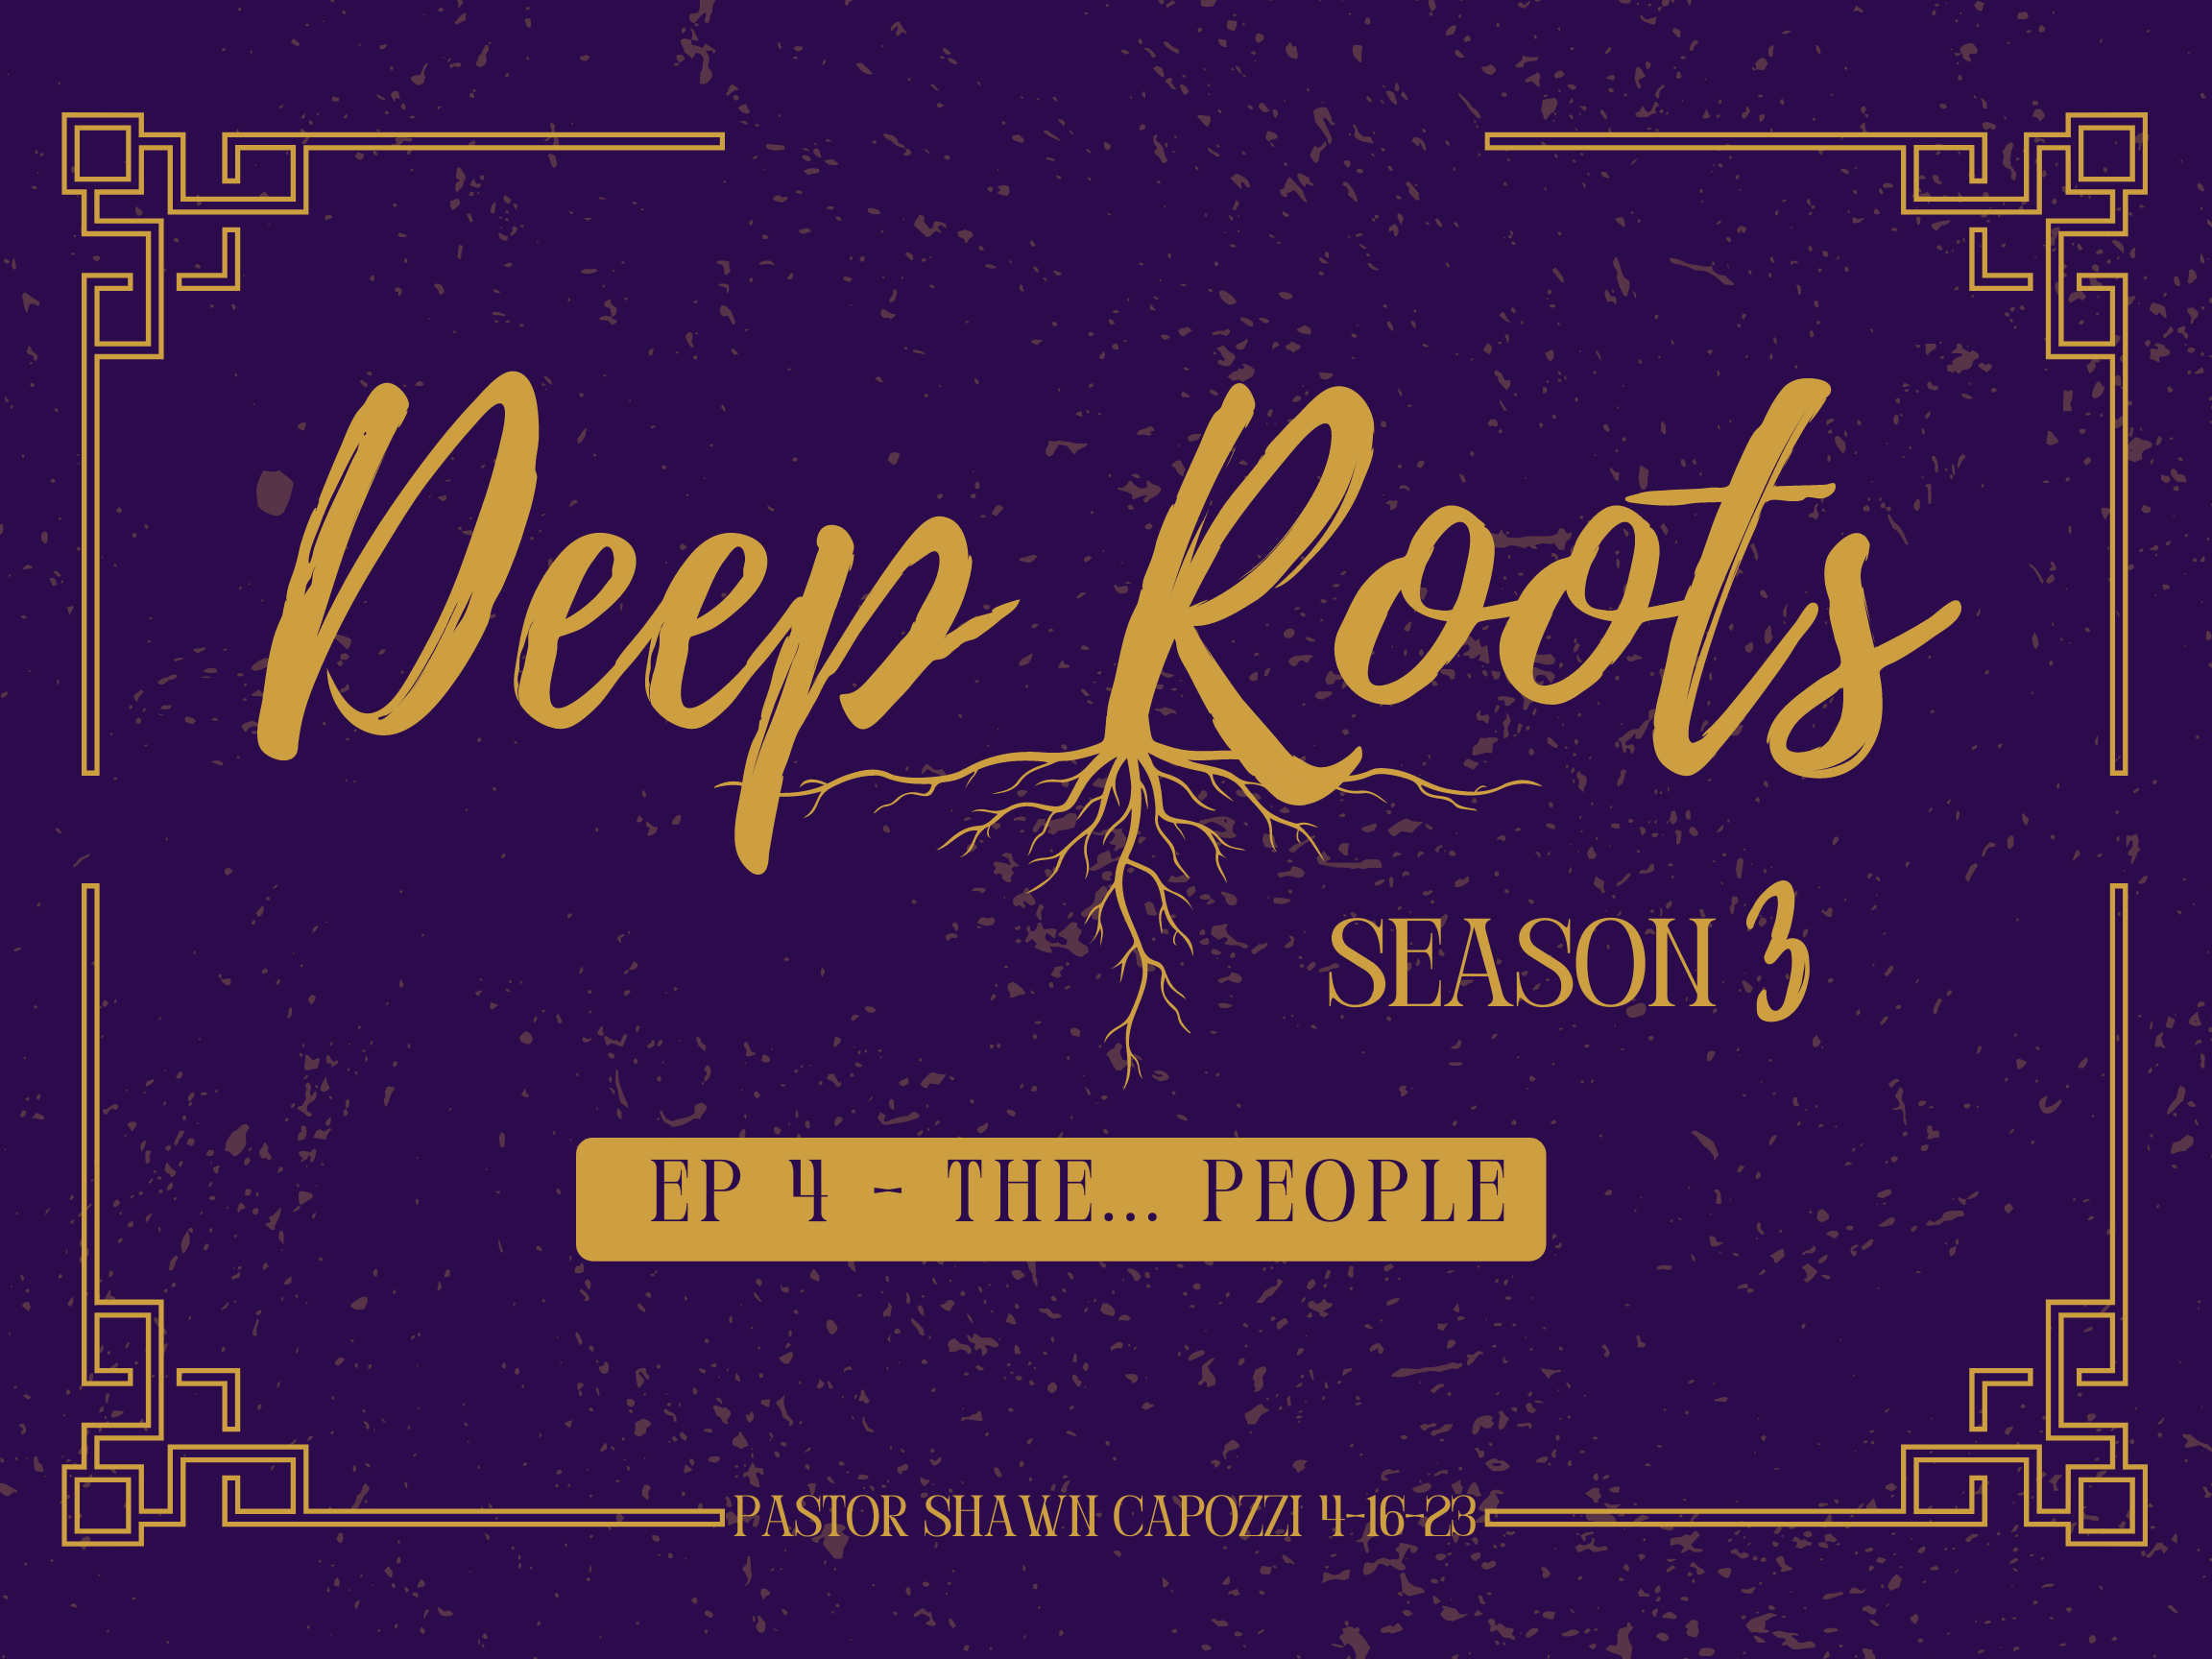 Deep Roots S3 E4 The...People